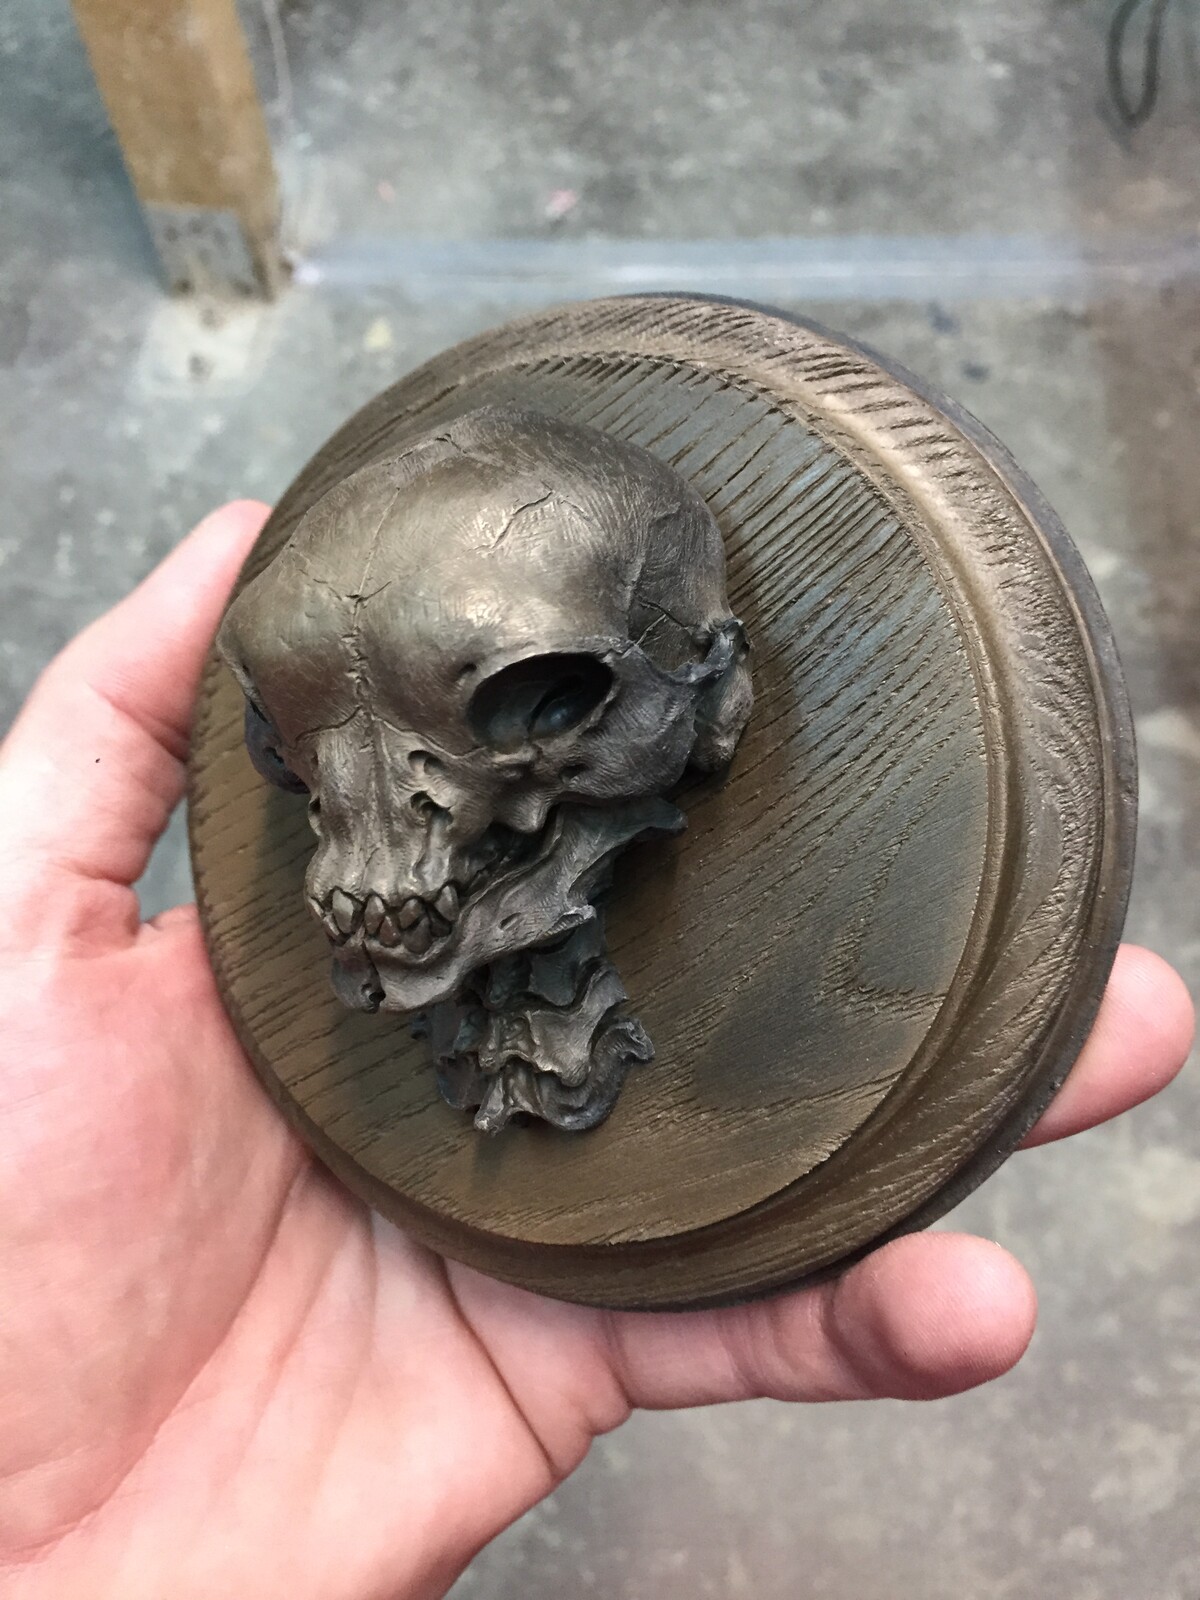 The original skull  was carved from polymer clay. This creature is made of bronze metal cold casting. Design and sculpture head made by Tomek Radziewicz. Collectible sculpture for horror and fantasy fans.
